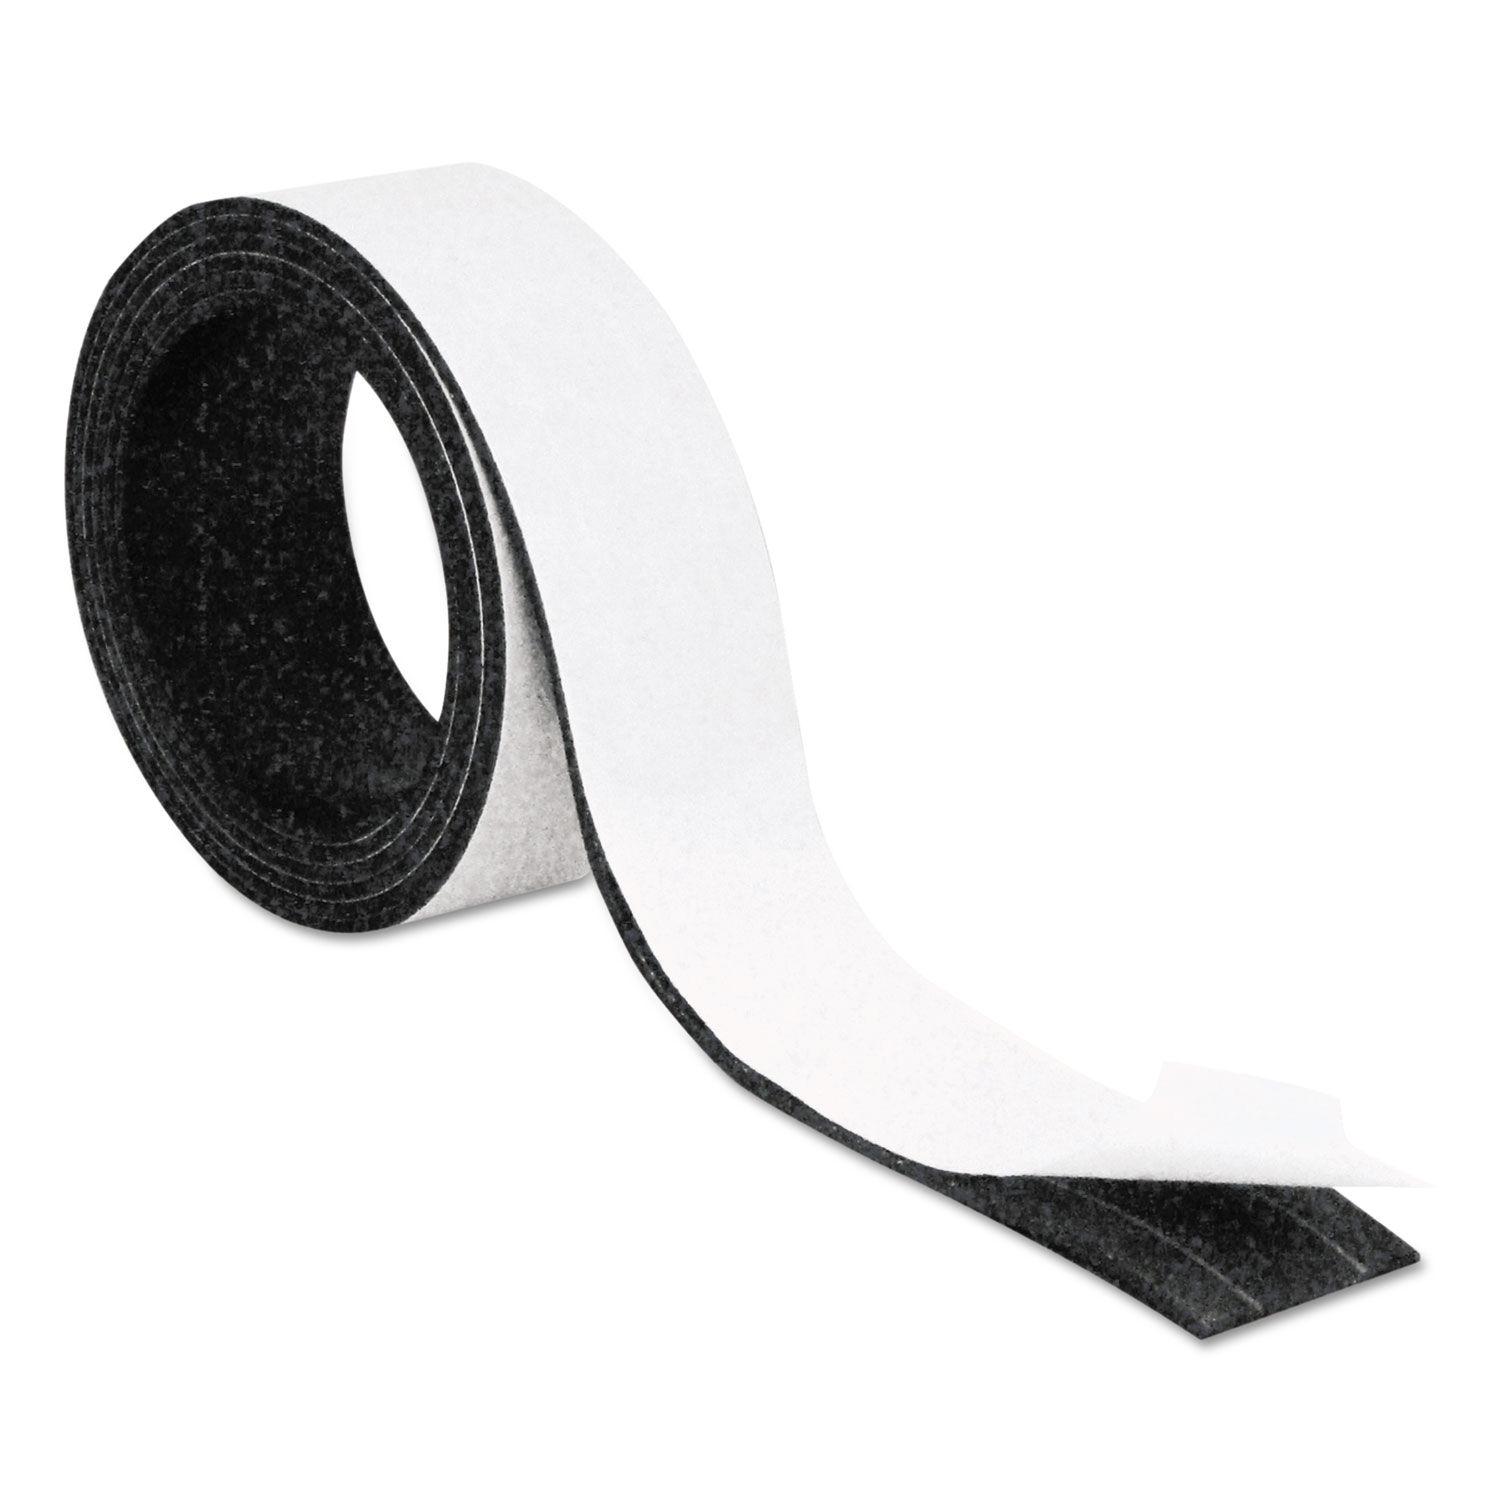 Magnetic Adhesive Tape Roll by MasterVision® BVCFM2021